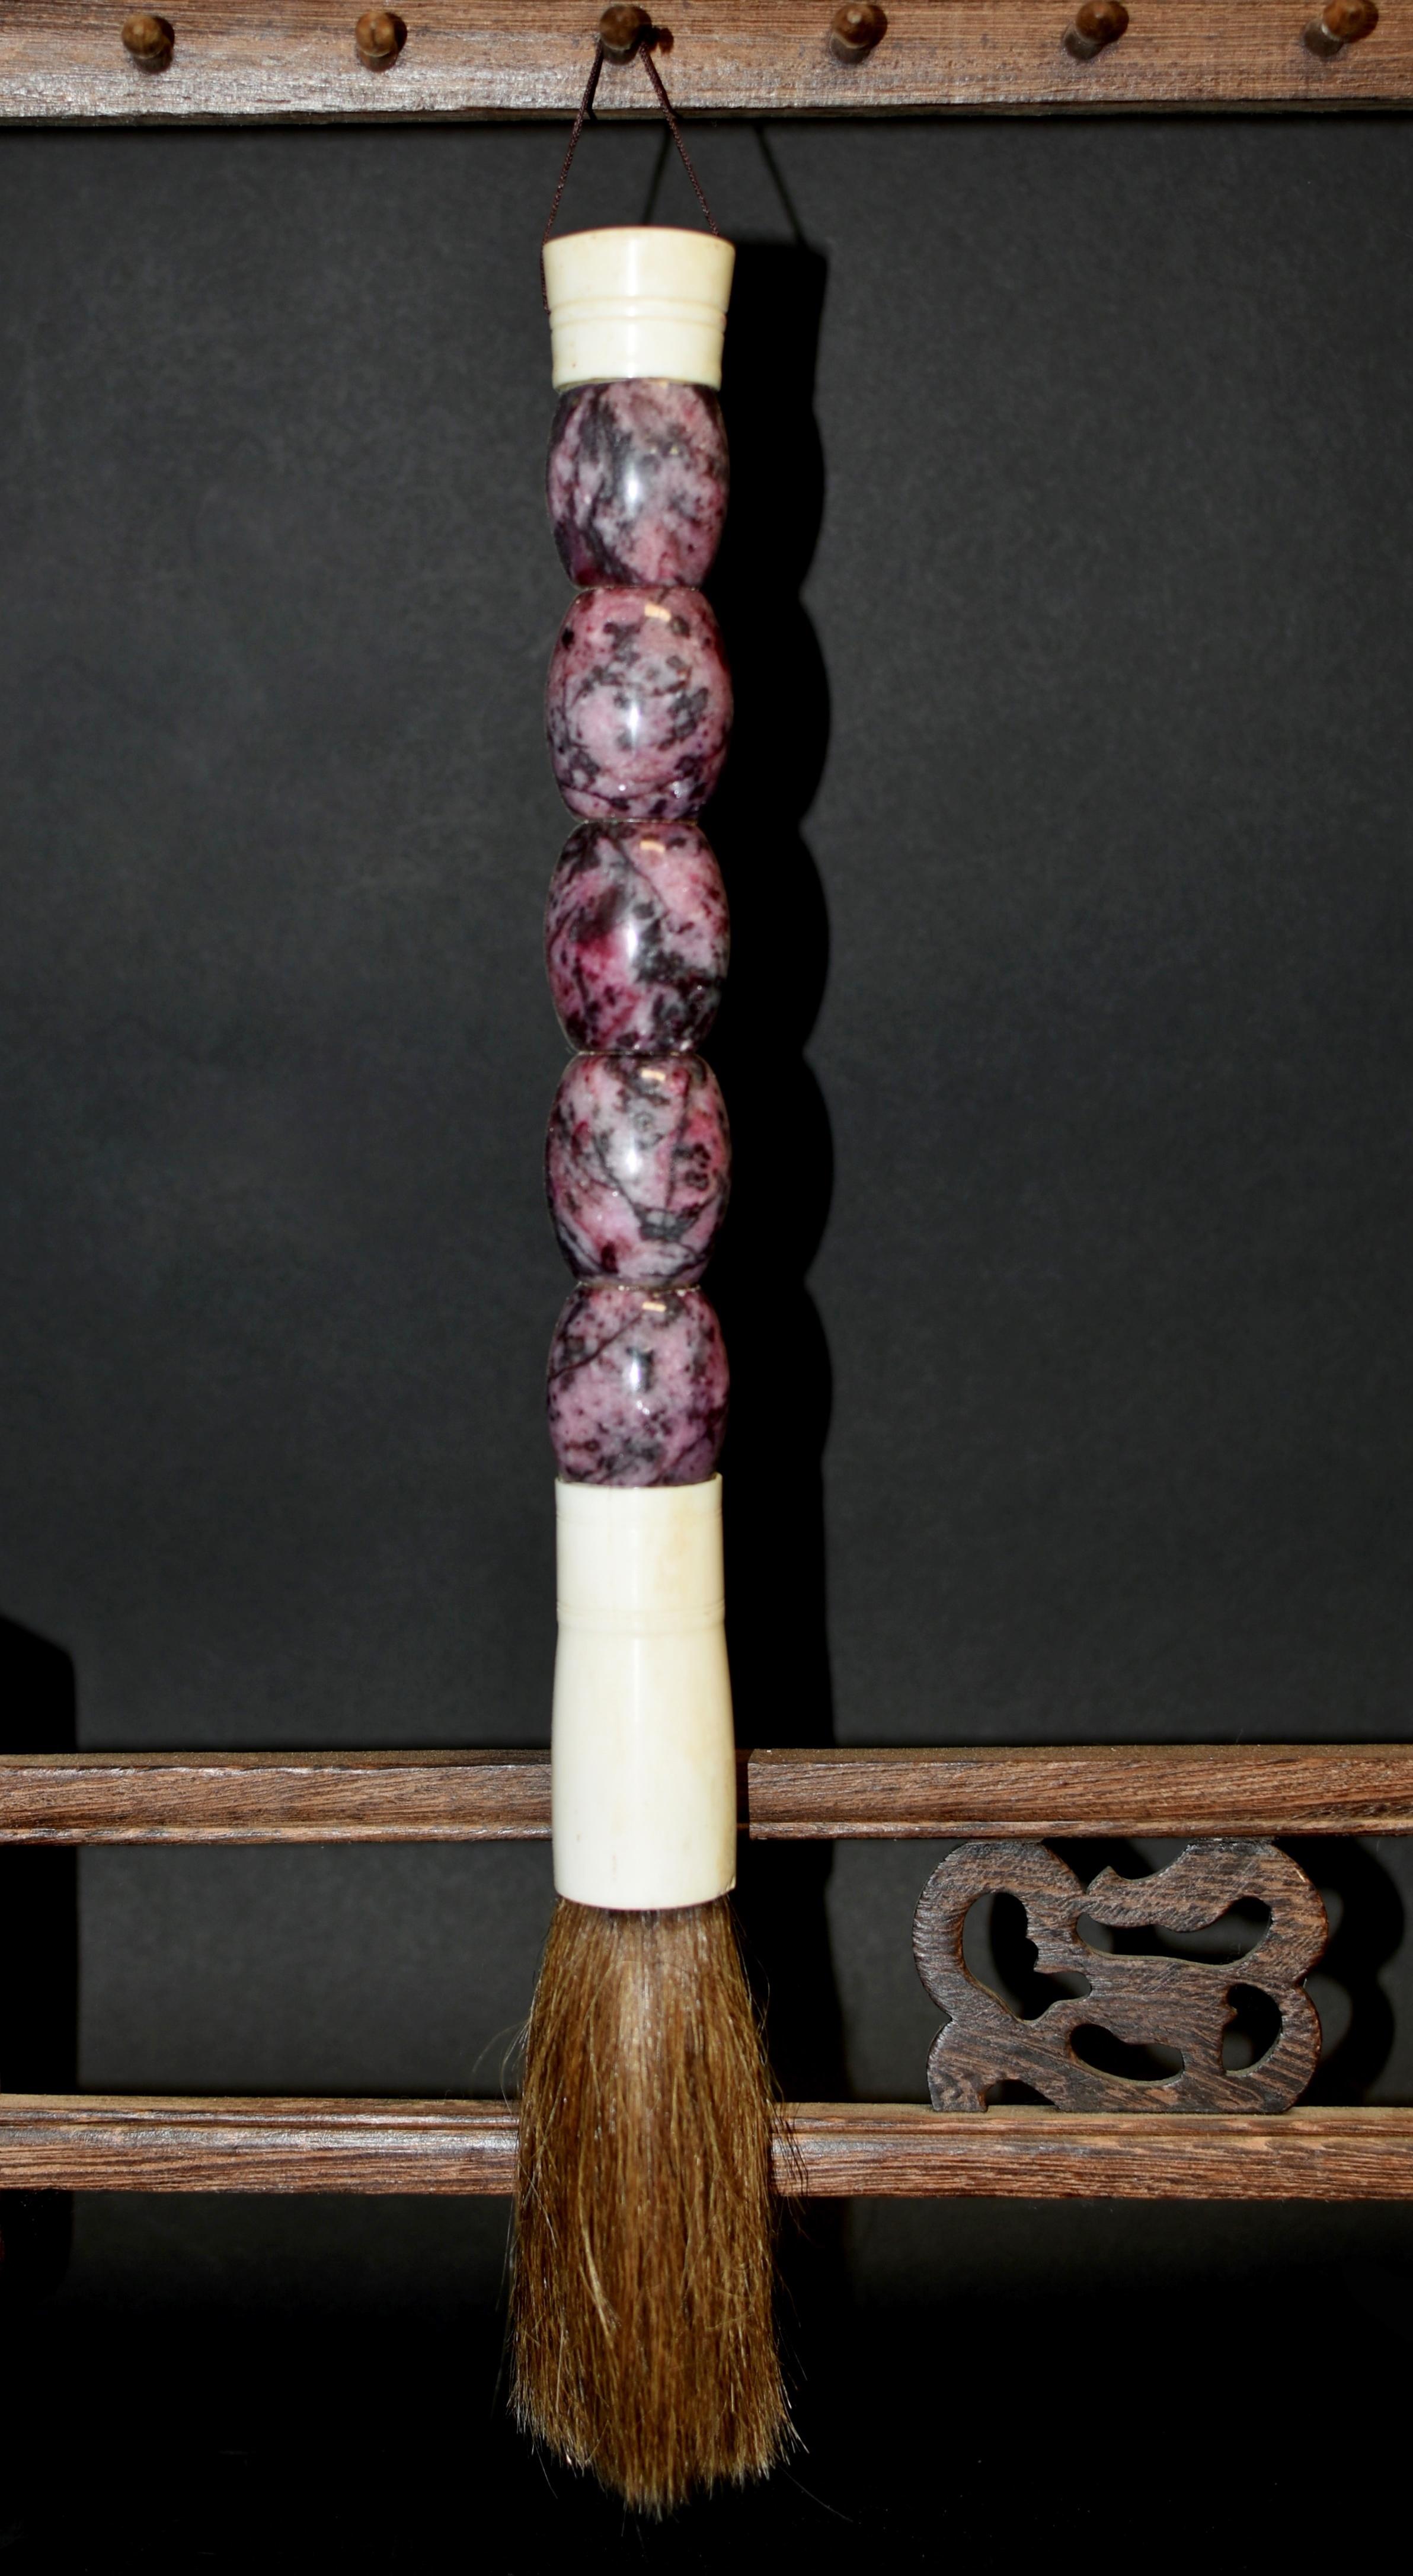 This is a very rare brush made with 5 rose pink rhodonite gemstones, each stone measuring at 1.25